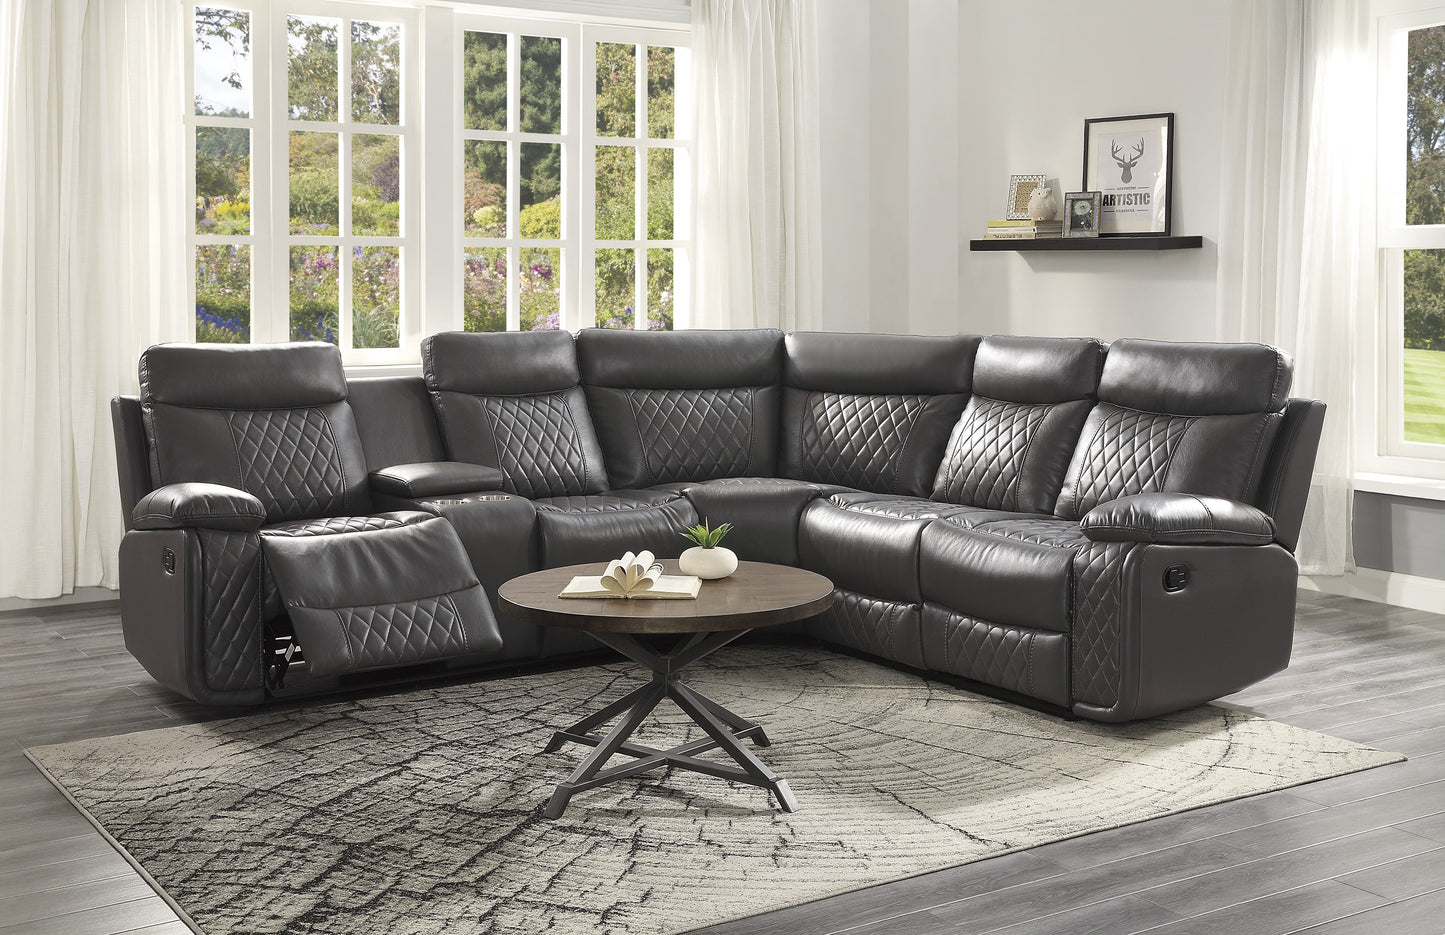 Socorro 3-Piece Reclining Sectional with Left Console GREY ONLY